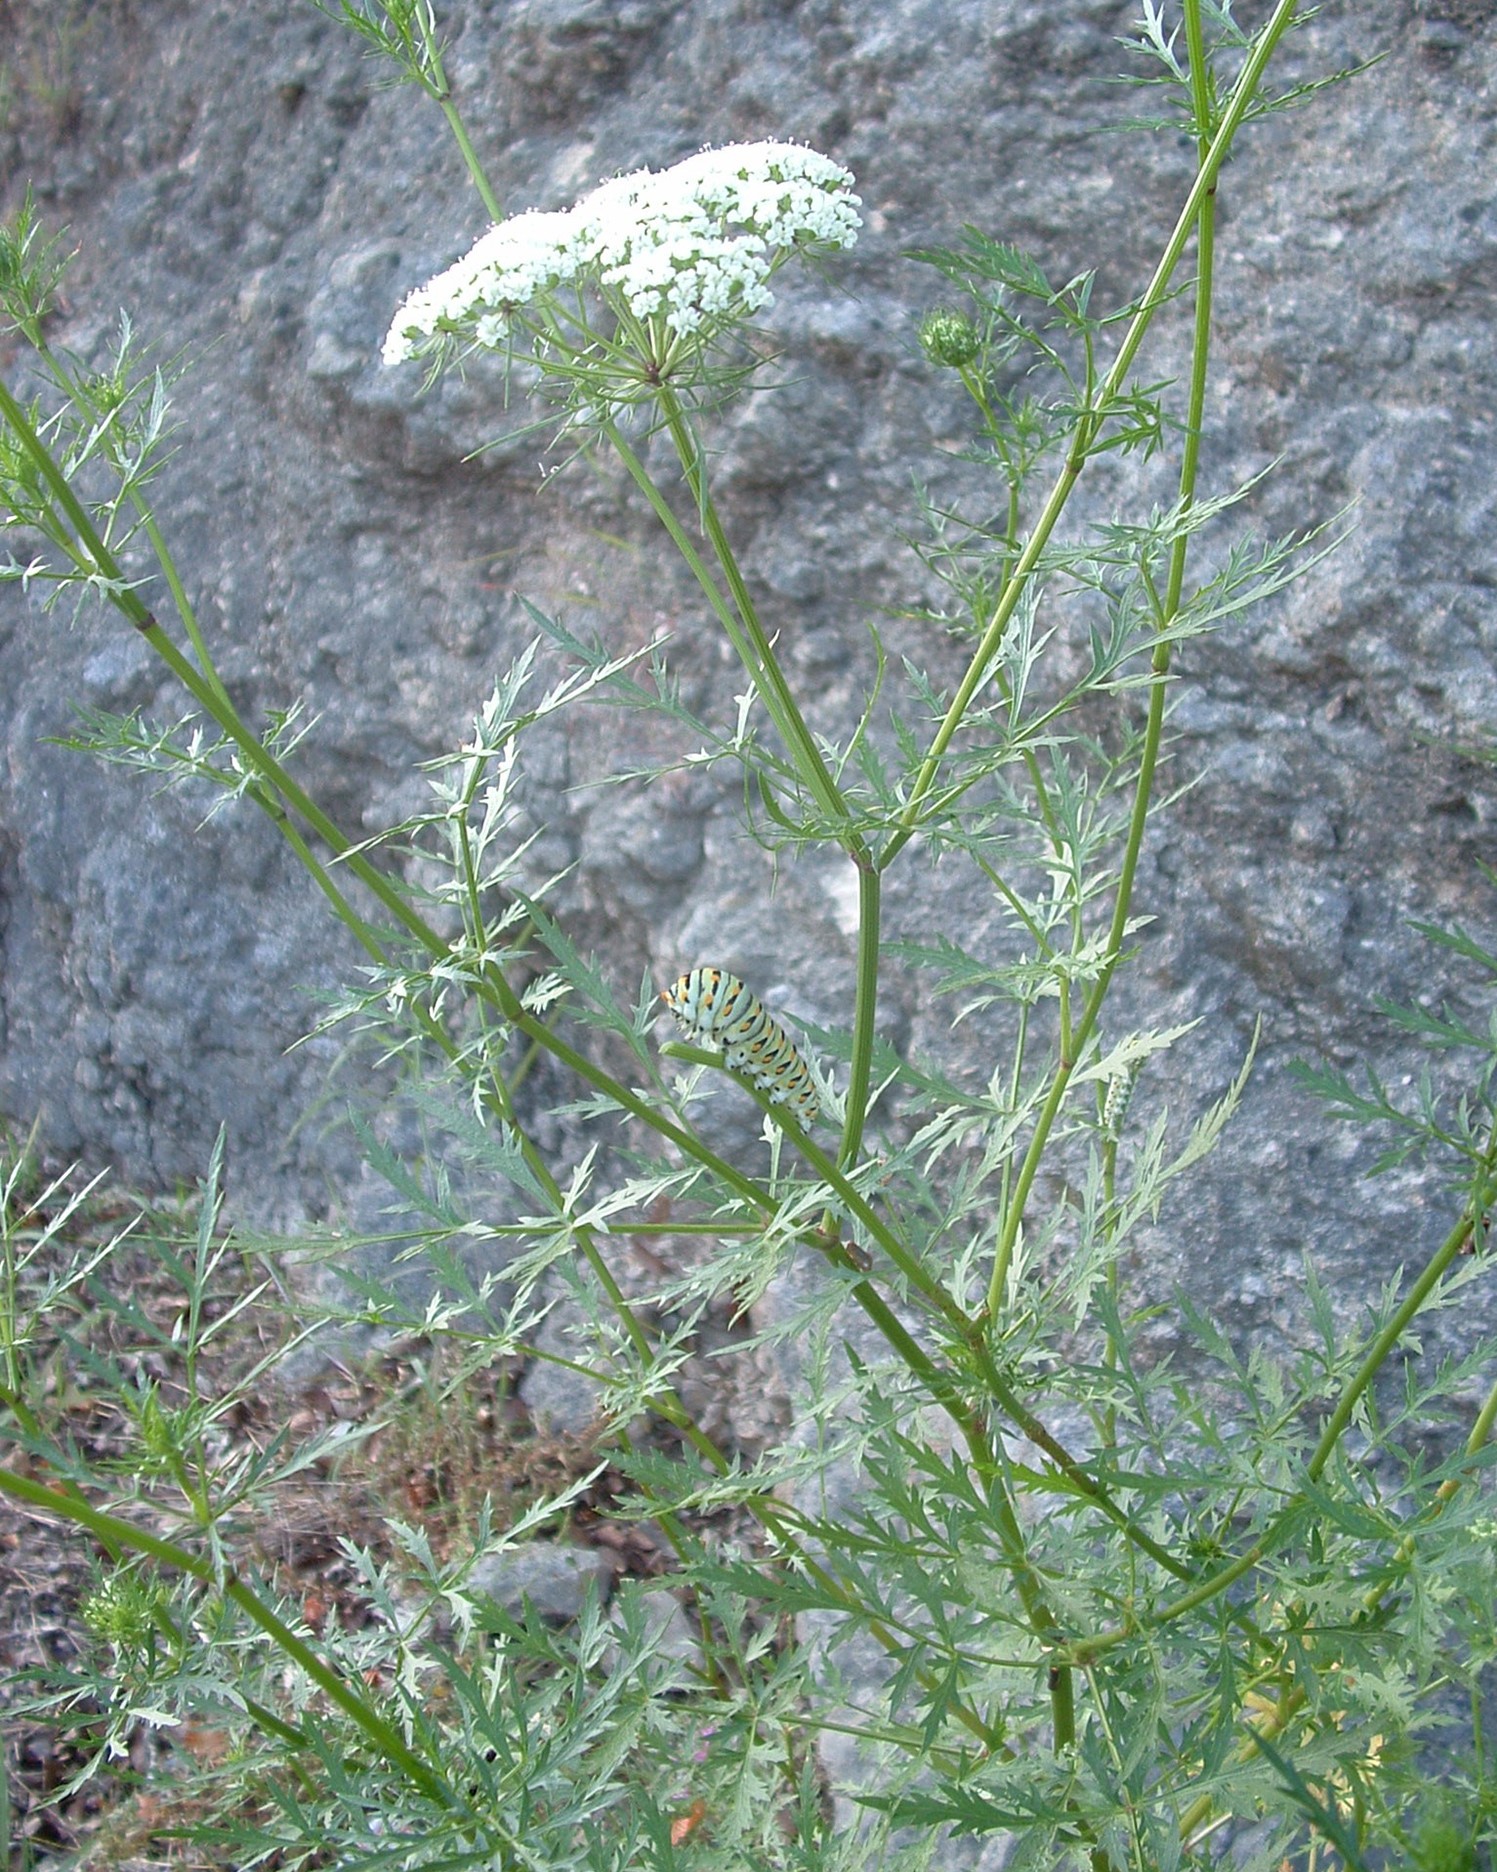 Daucosma laciniata growing infront of a rock. The plant is in flower, showing the white flowers of the umbel.